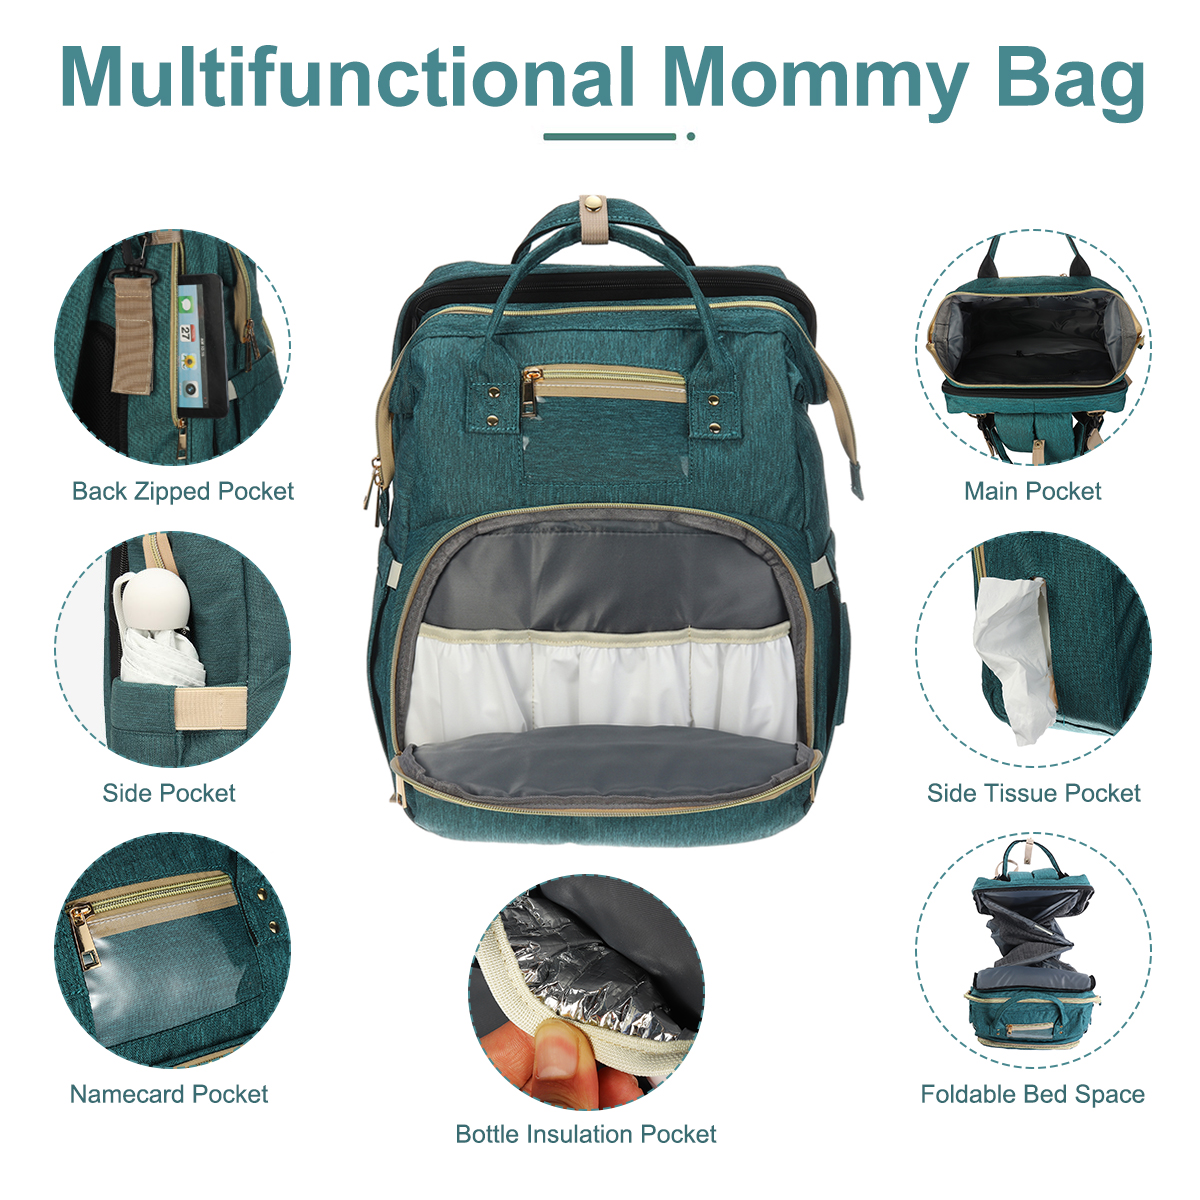 Multifunctional-Folding-Diaper-Bag-Waterproof-Baby-Sleep-Infant-Bed-Changing-Station-Outdoor-Travel--1810331-2